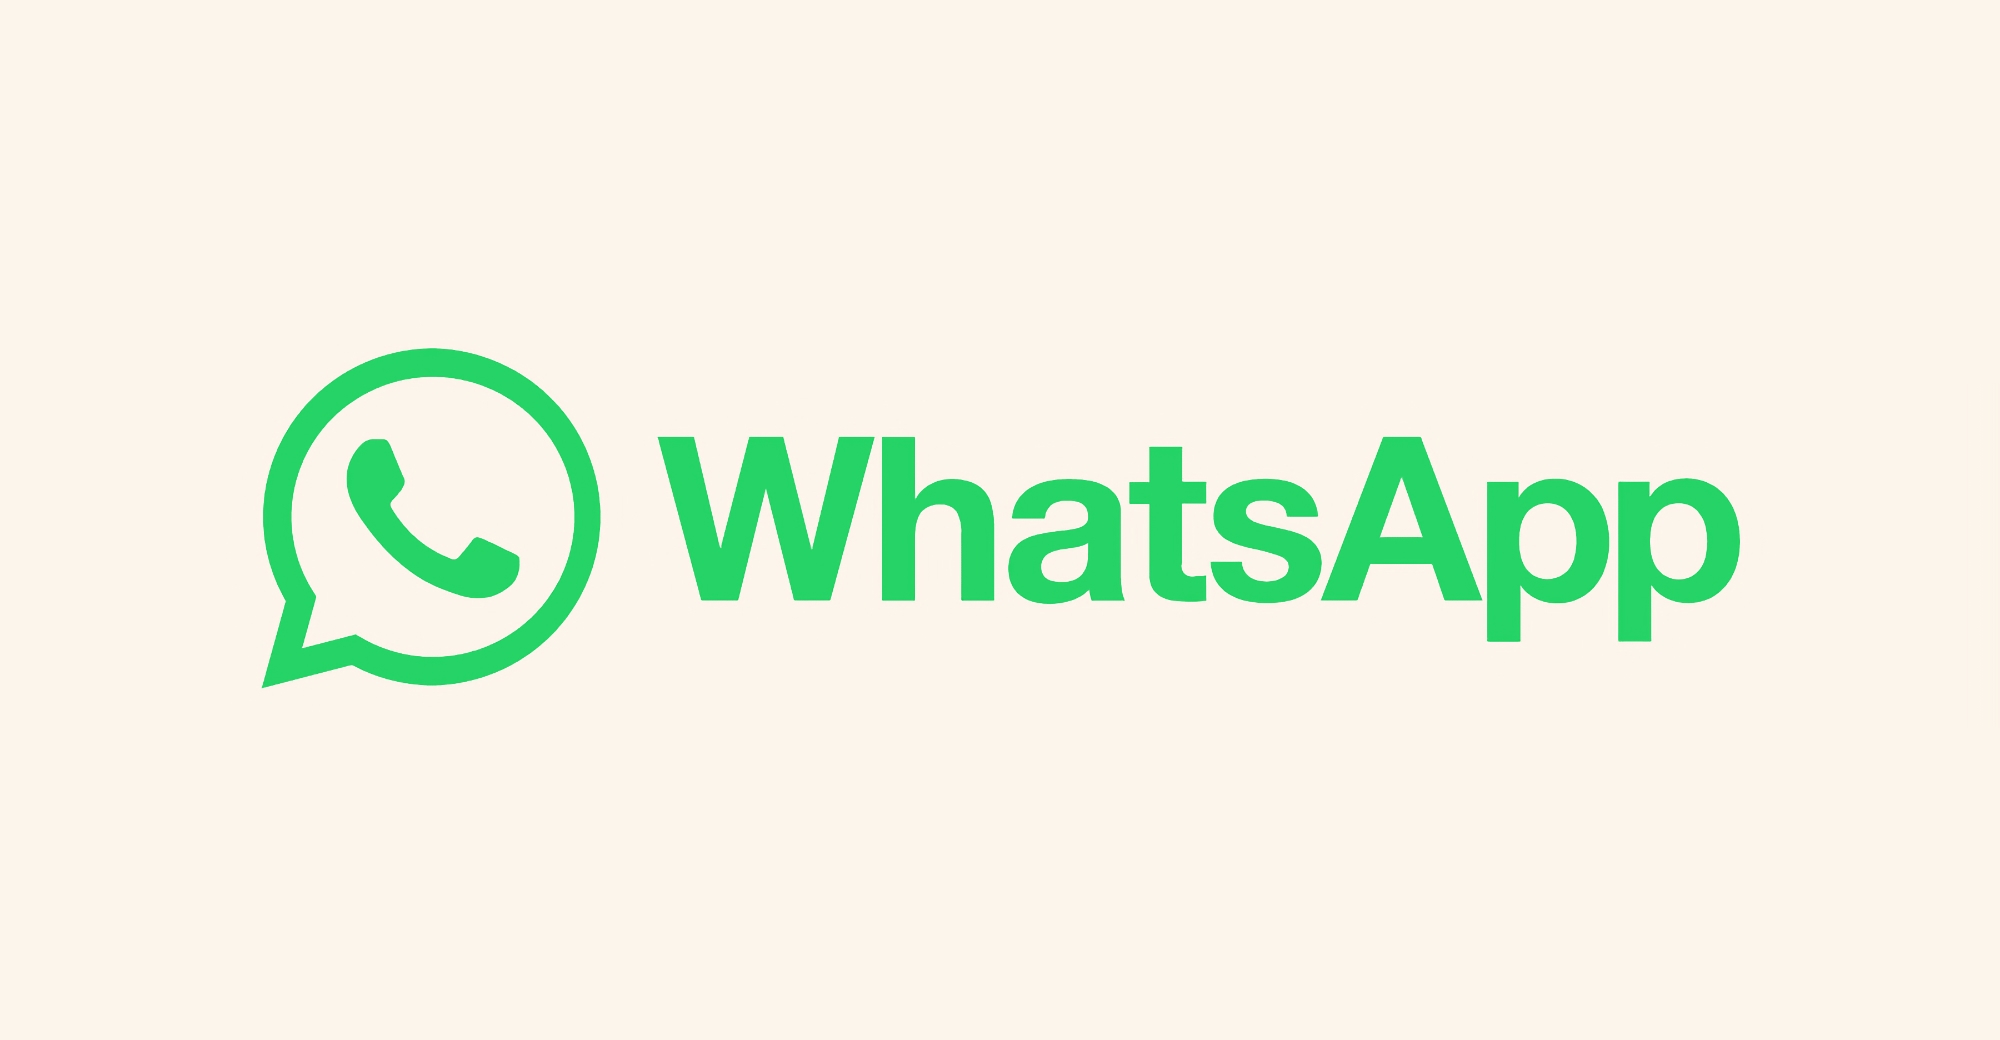 On January 1, WhatsApp will no longer work on the Galaxy S2, Galaxy S3 Mini, iPhone 5, iPhone 5C and 43 other models